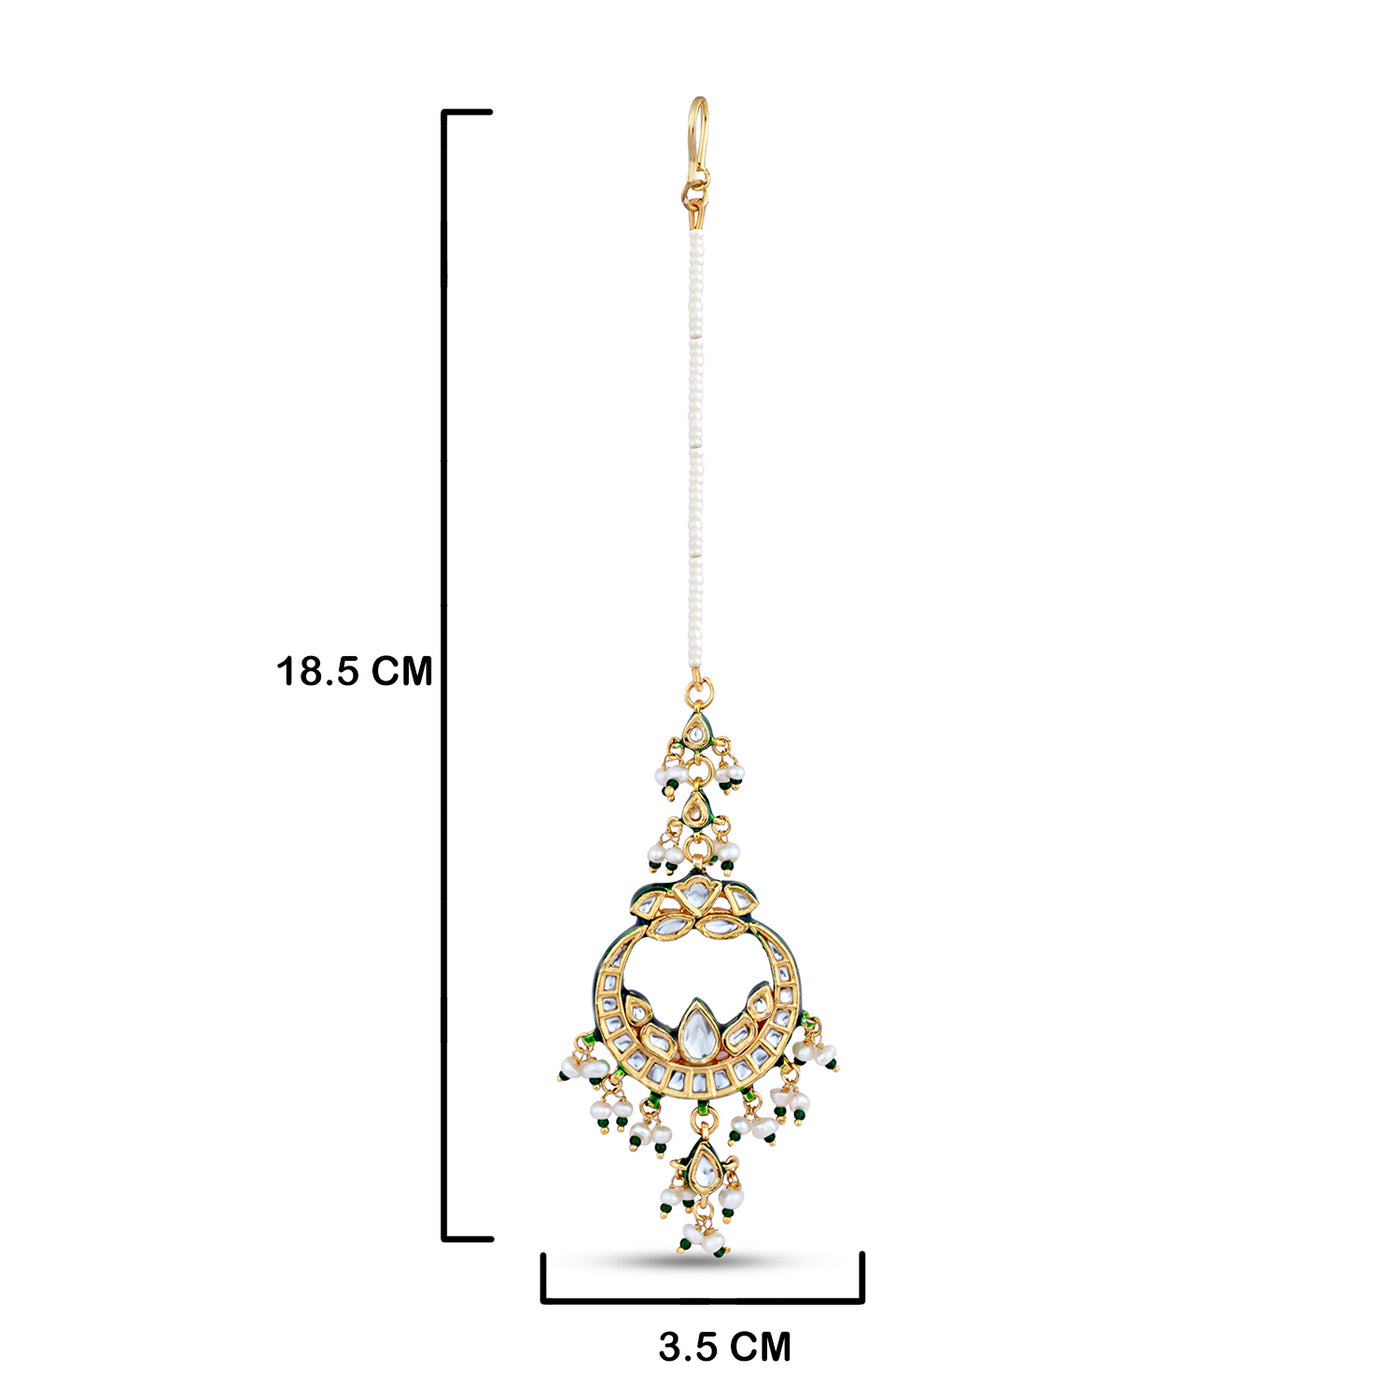  Beaded Pearled Maang Tikka with measurements in cm. 18.5cm by 3.5cm.